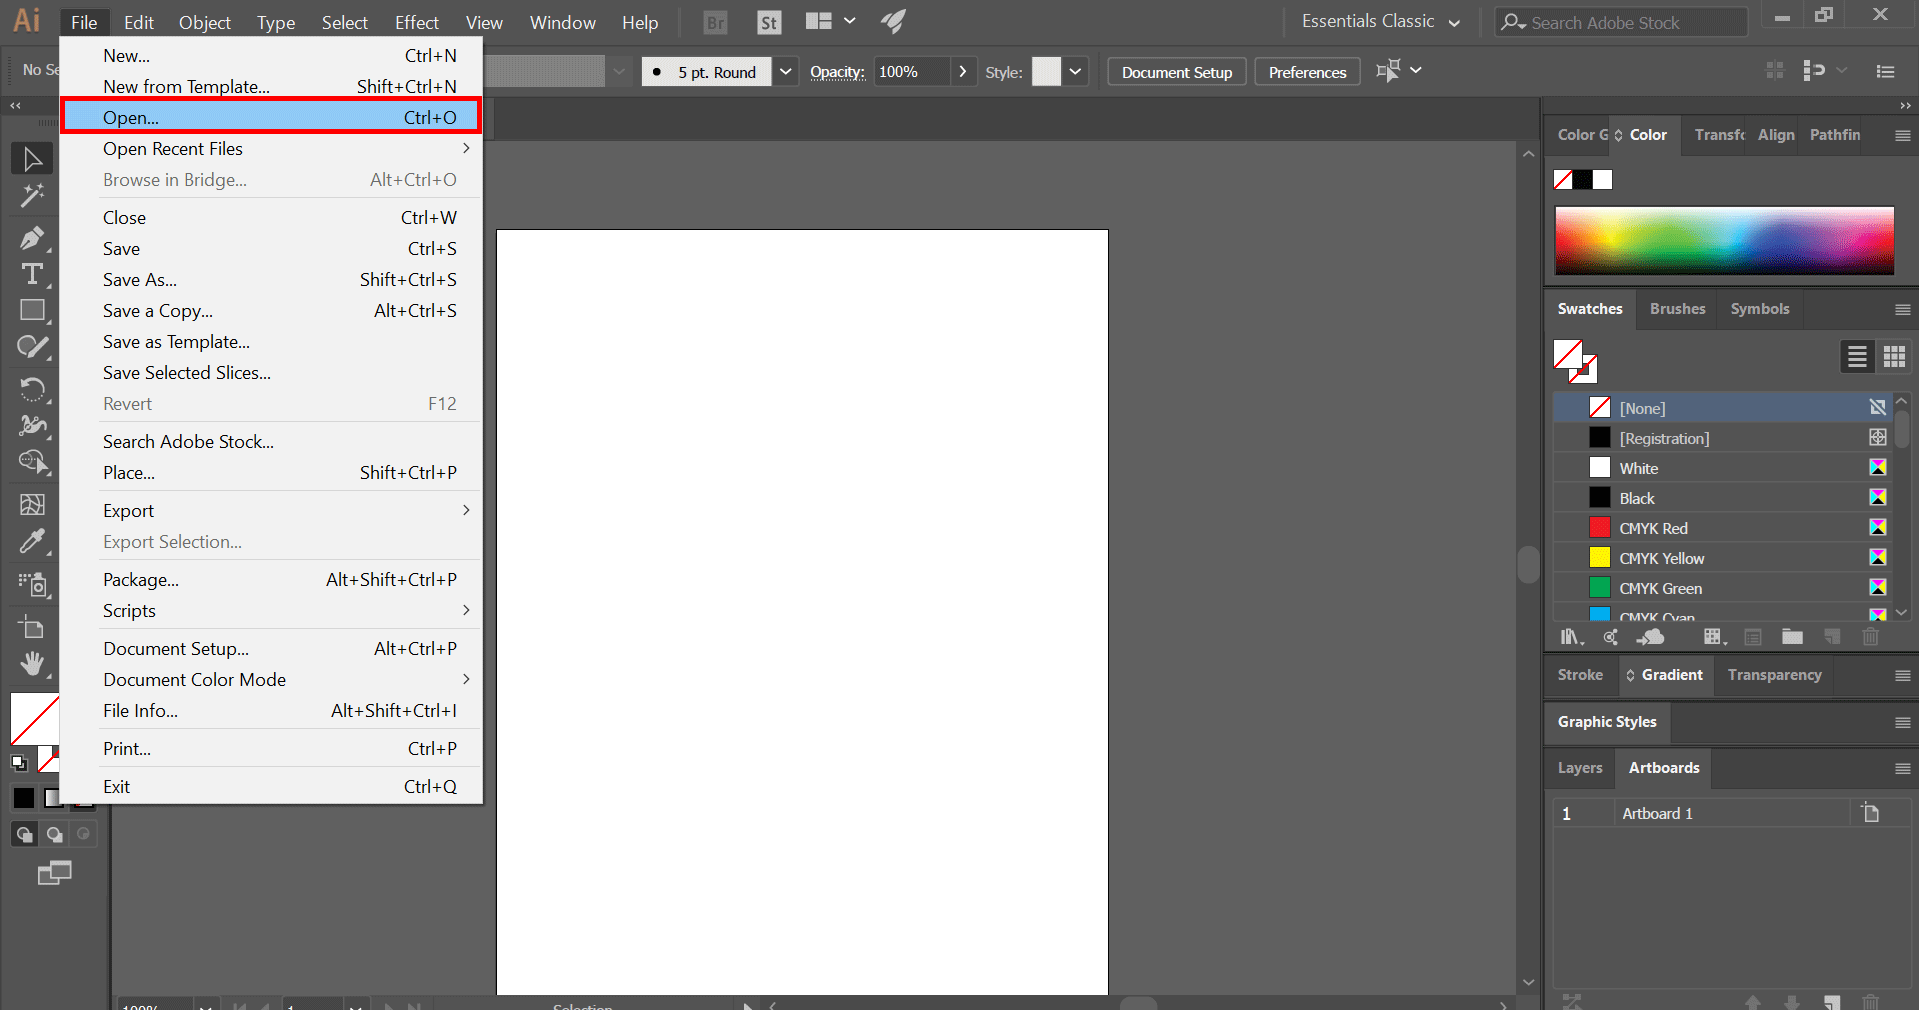 Insert Image in Illustrator | How to Insert or Import Images in Illustrator?